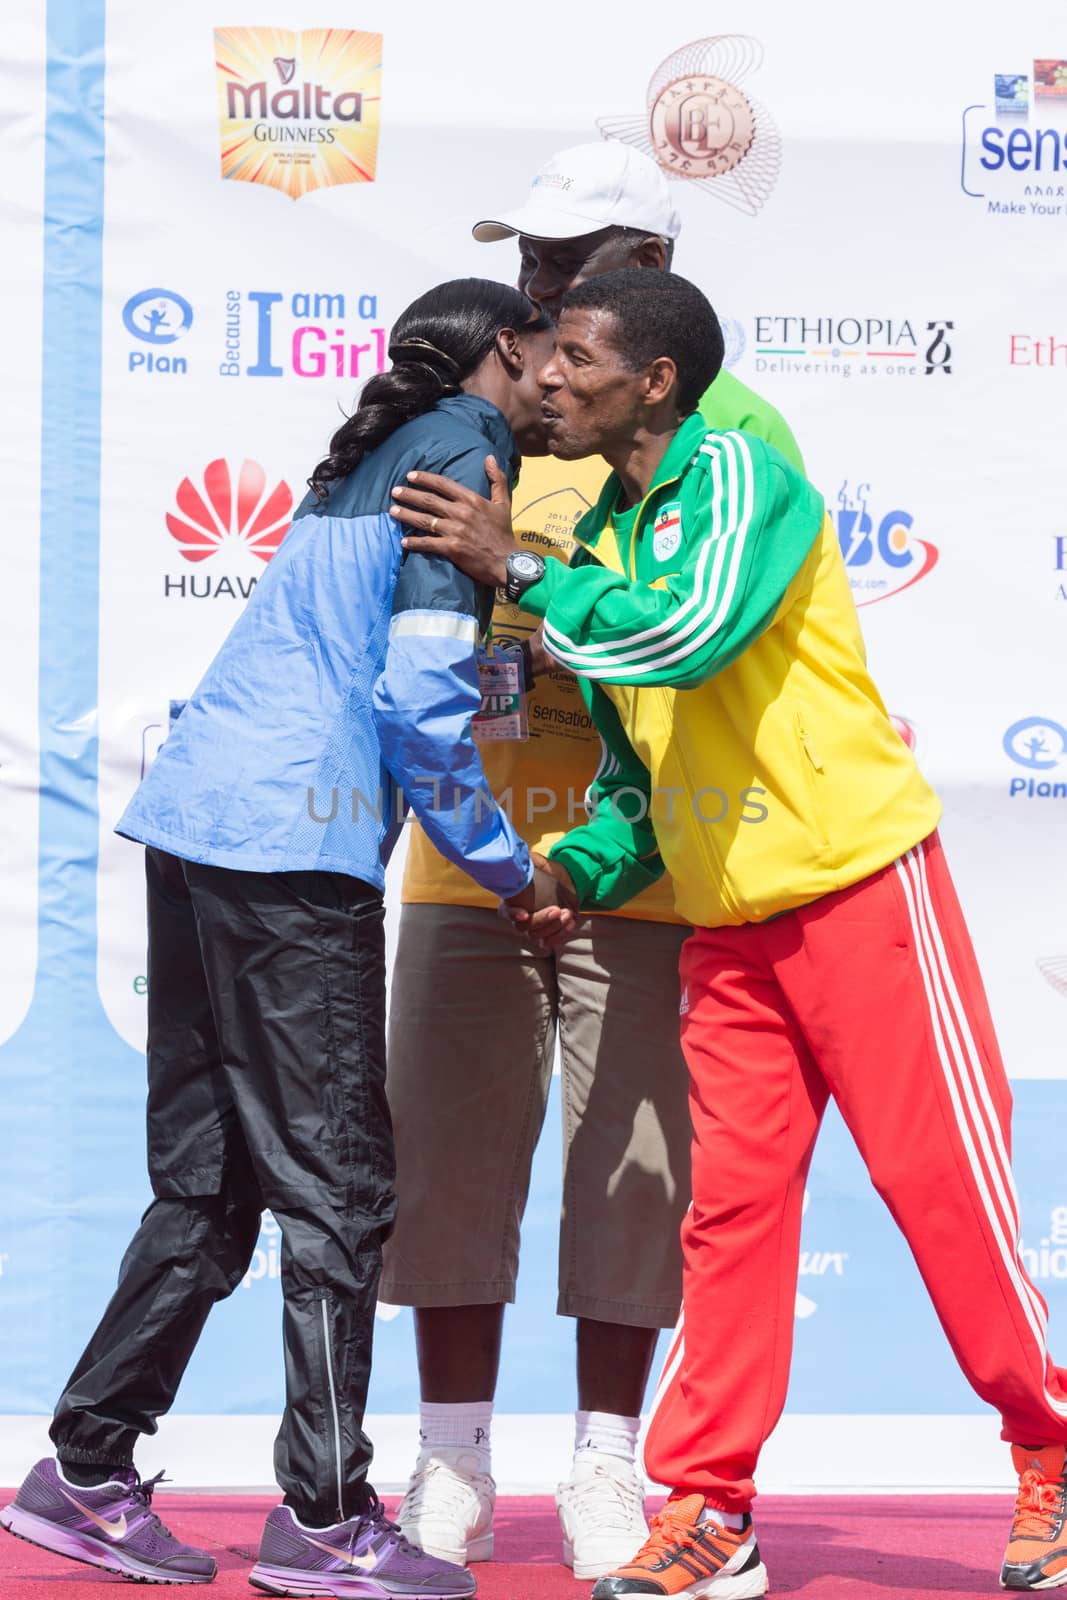 Addis Ababa, Ethiopia – November 24: World renowned athlete Haile Gebrselassie greets 2013 NY Marathon winner Priscah Jeptoo on stage at the 13th Edition Great Ethiopian Run, 24th of November 2013 in Addis Ababa, Ethiopia.